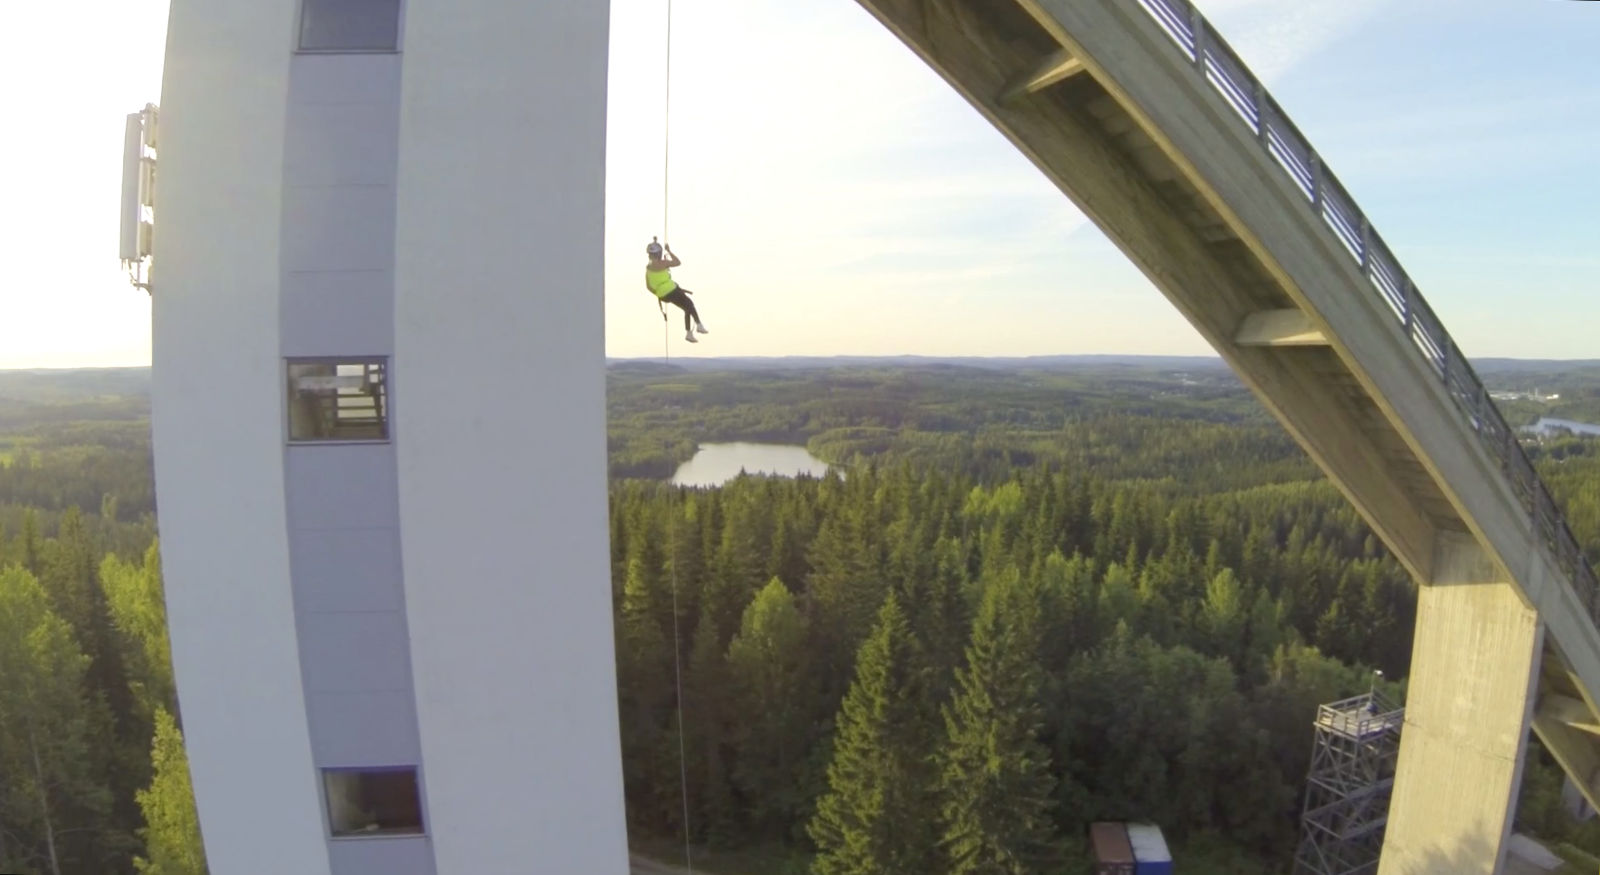 Rappelling from ski jump tower